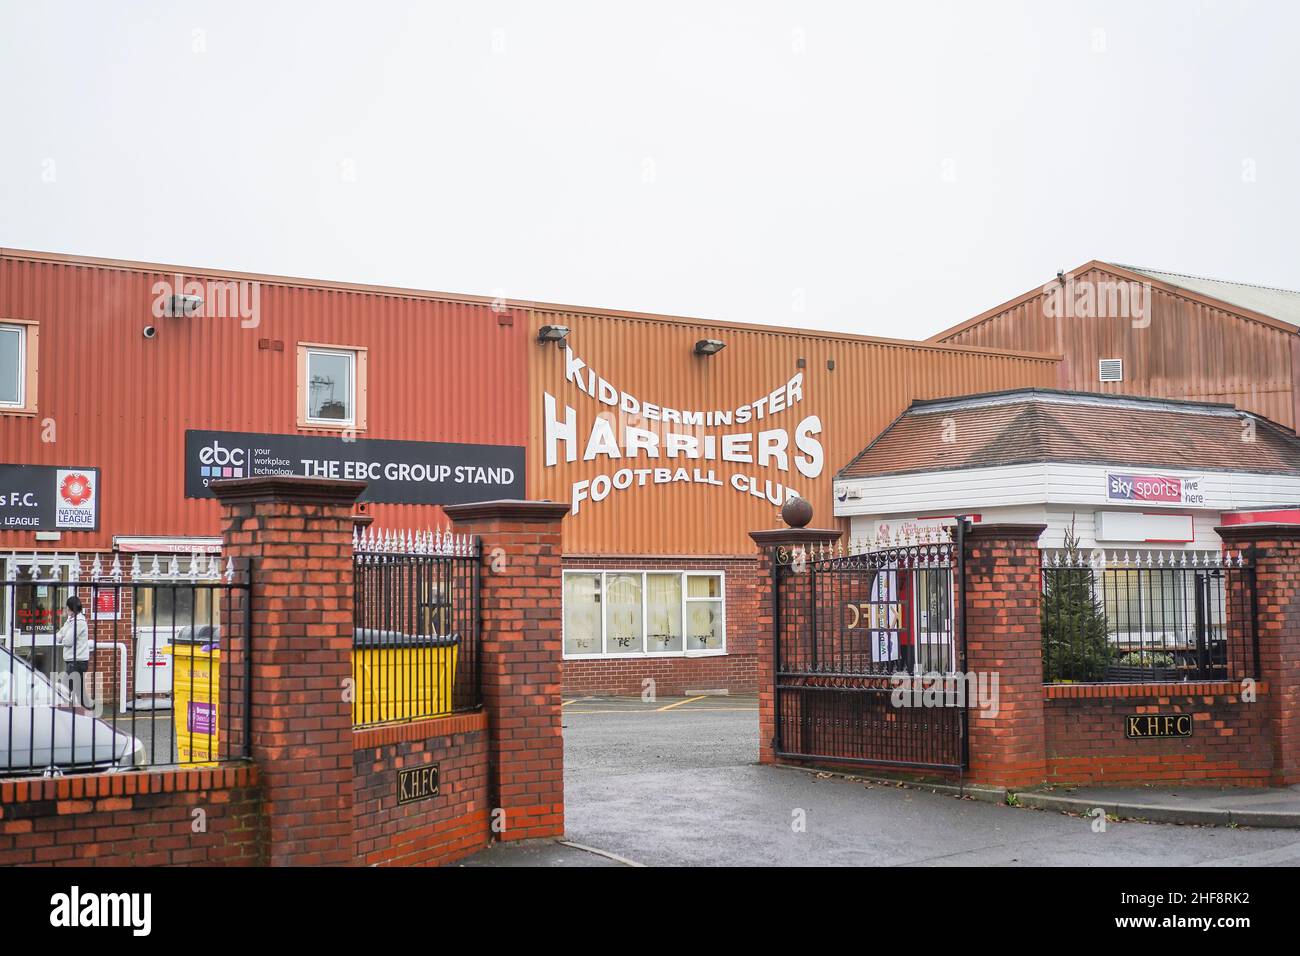 Kidderminster Harriers Football Club, Worcestershire, Regno Unito. Foto Stock